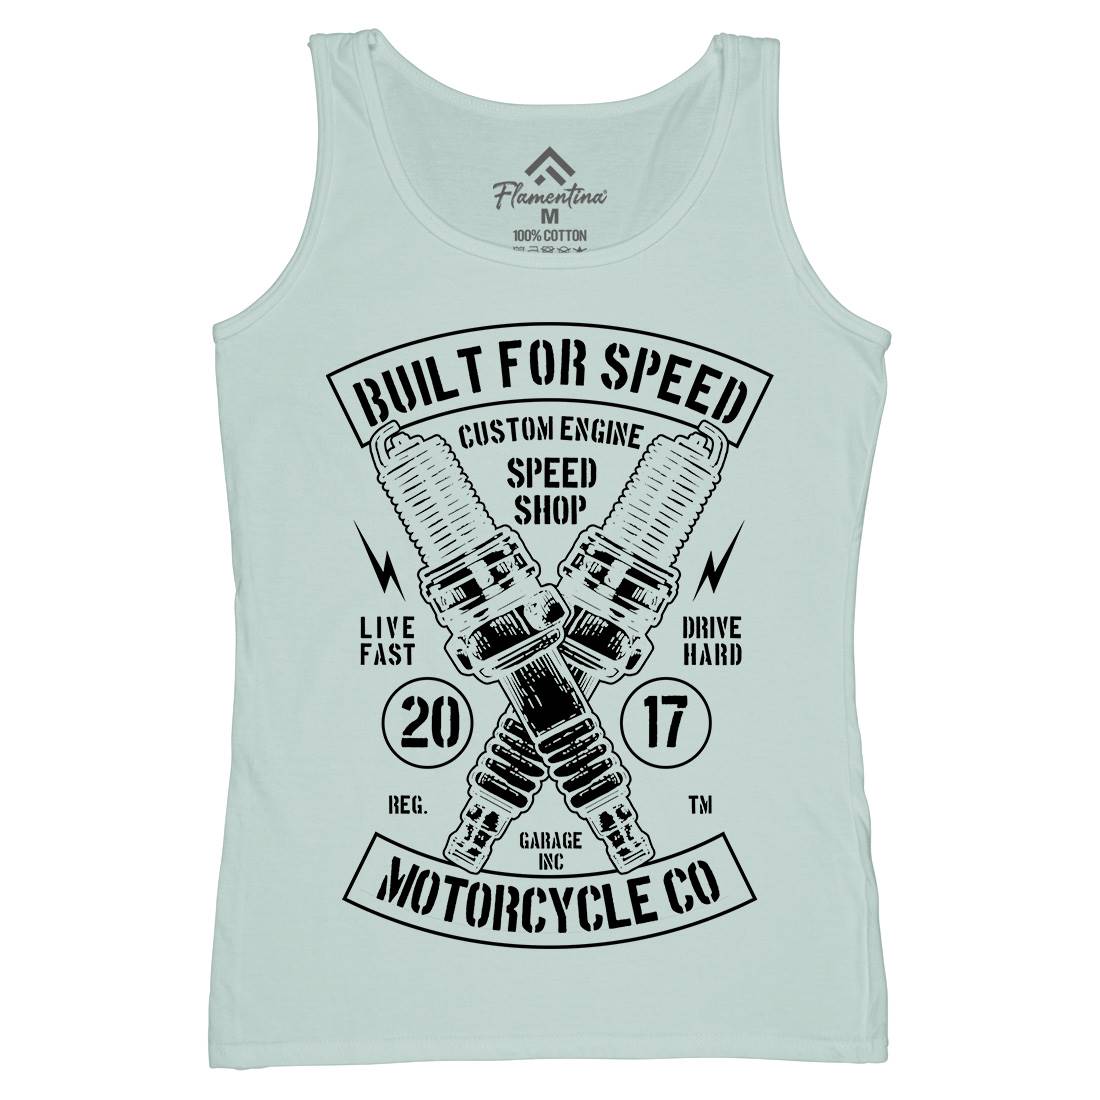 Built For Speed Womens Organic Tank Top Vest Motorcycles B188